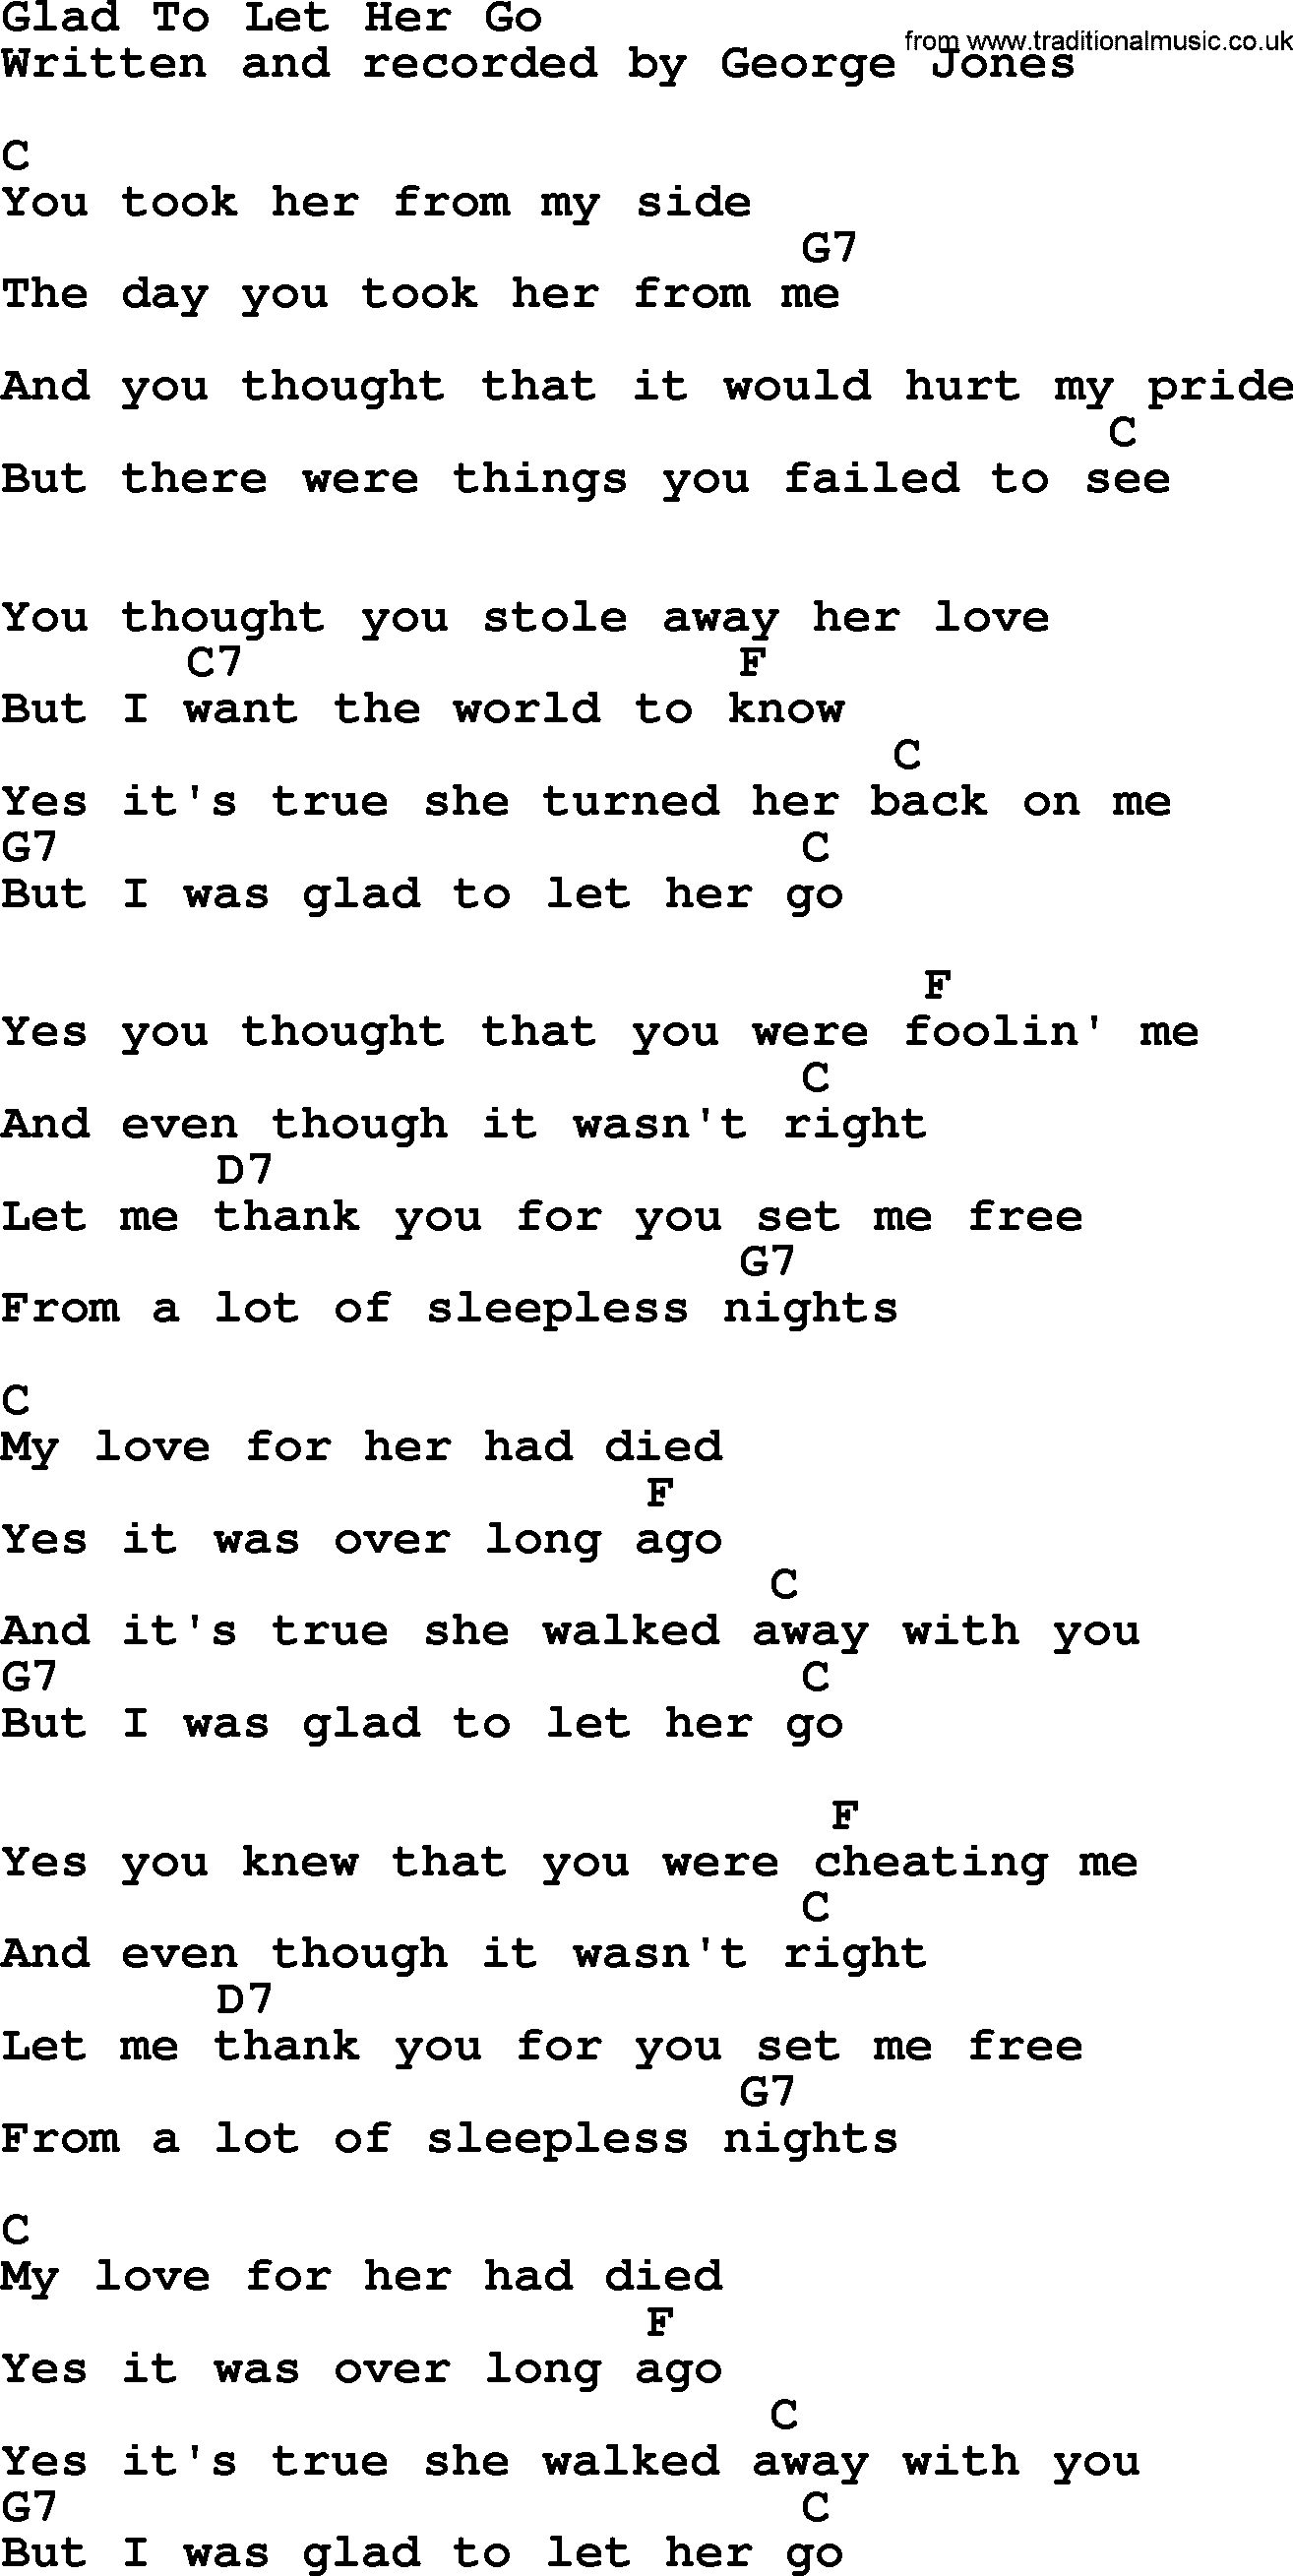 George Jones song: Glad To Let Her Go, lyrics and chords